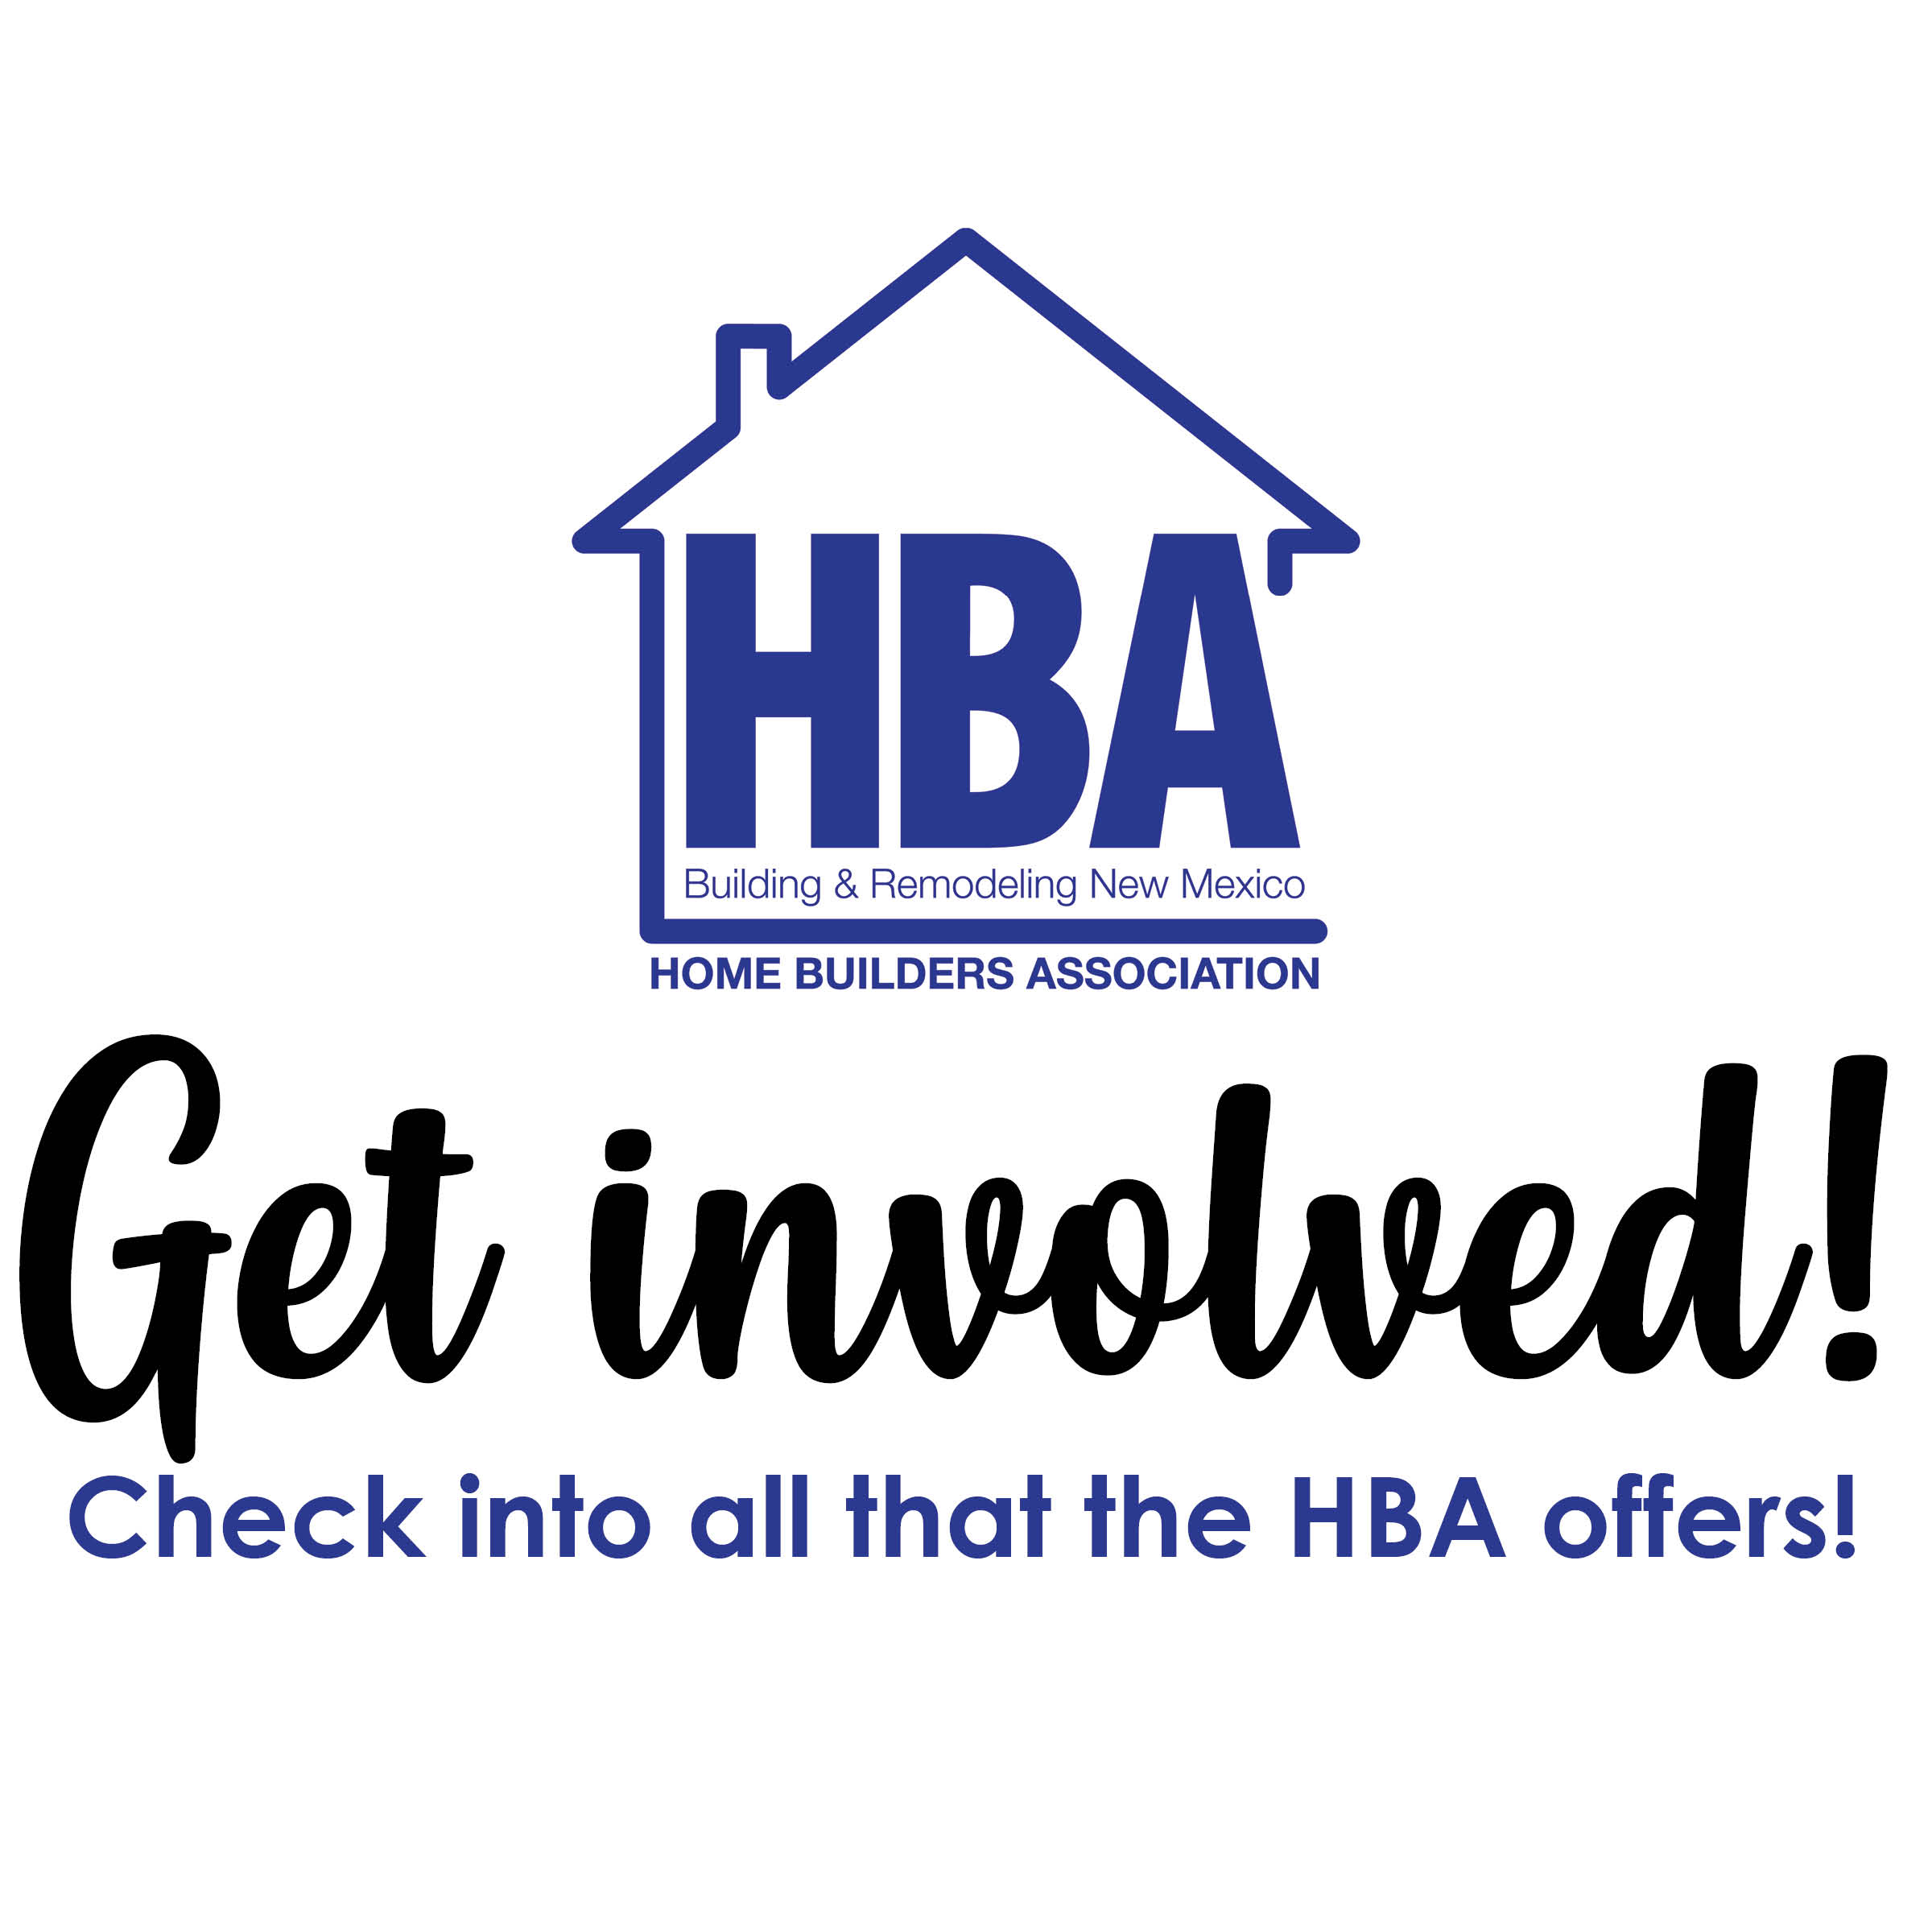 Featured image for “Getting involved with the HBA”